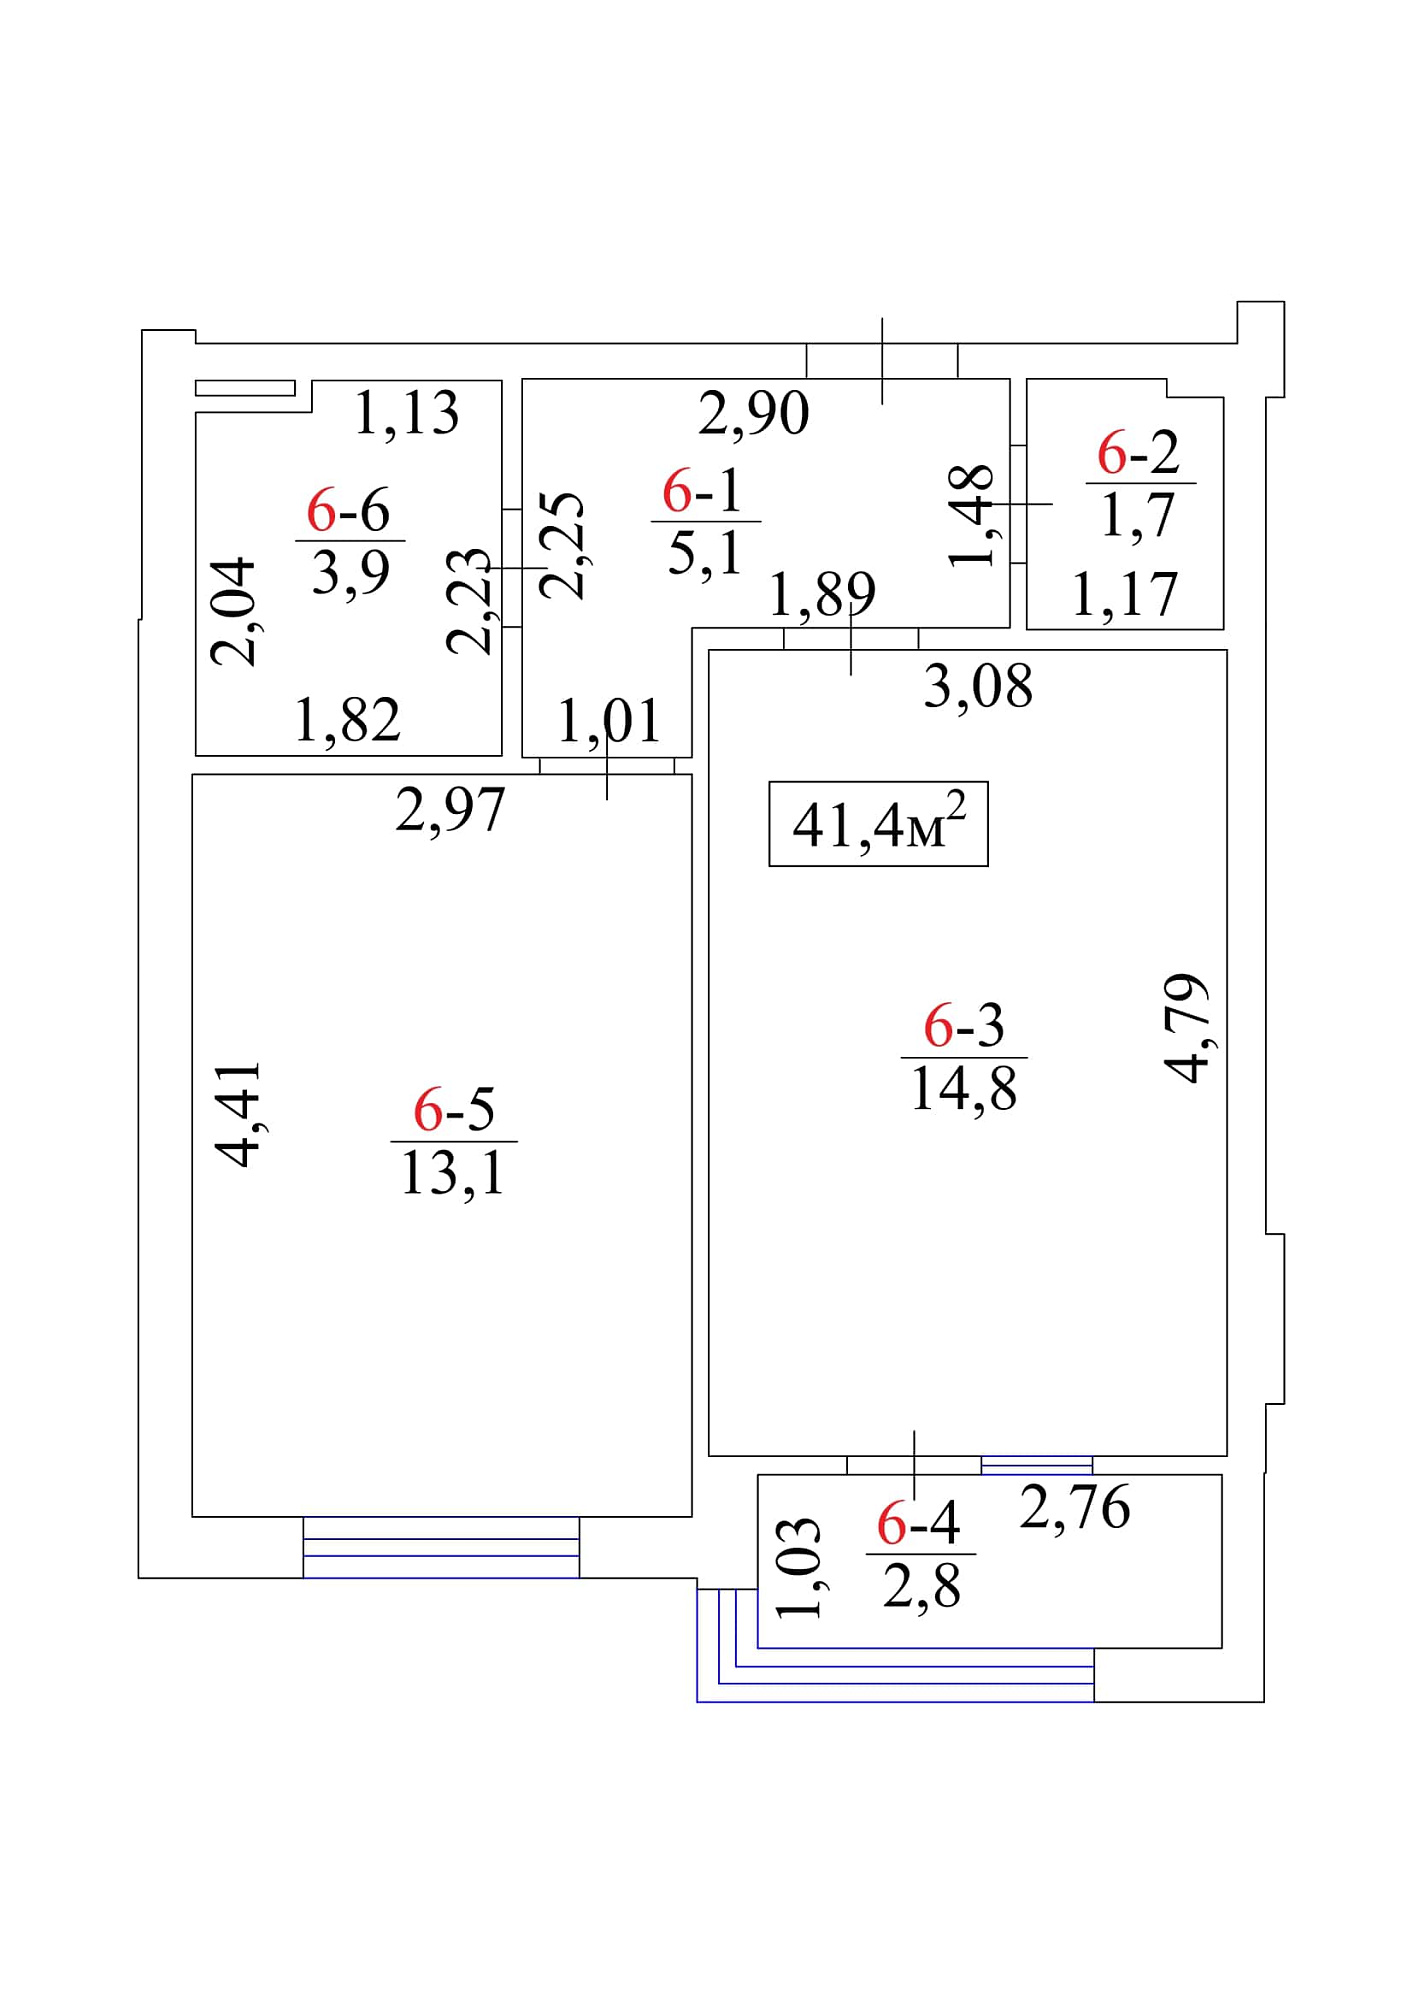 Planning 1-rm flats area 41.4m2, AB-01-01/00008.